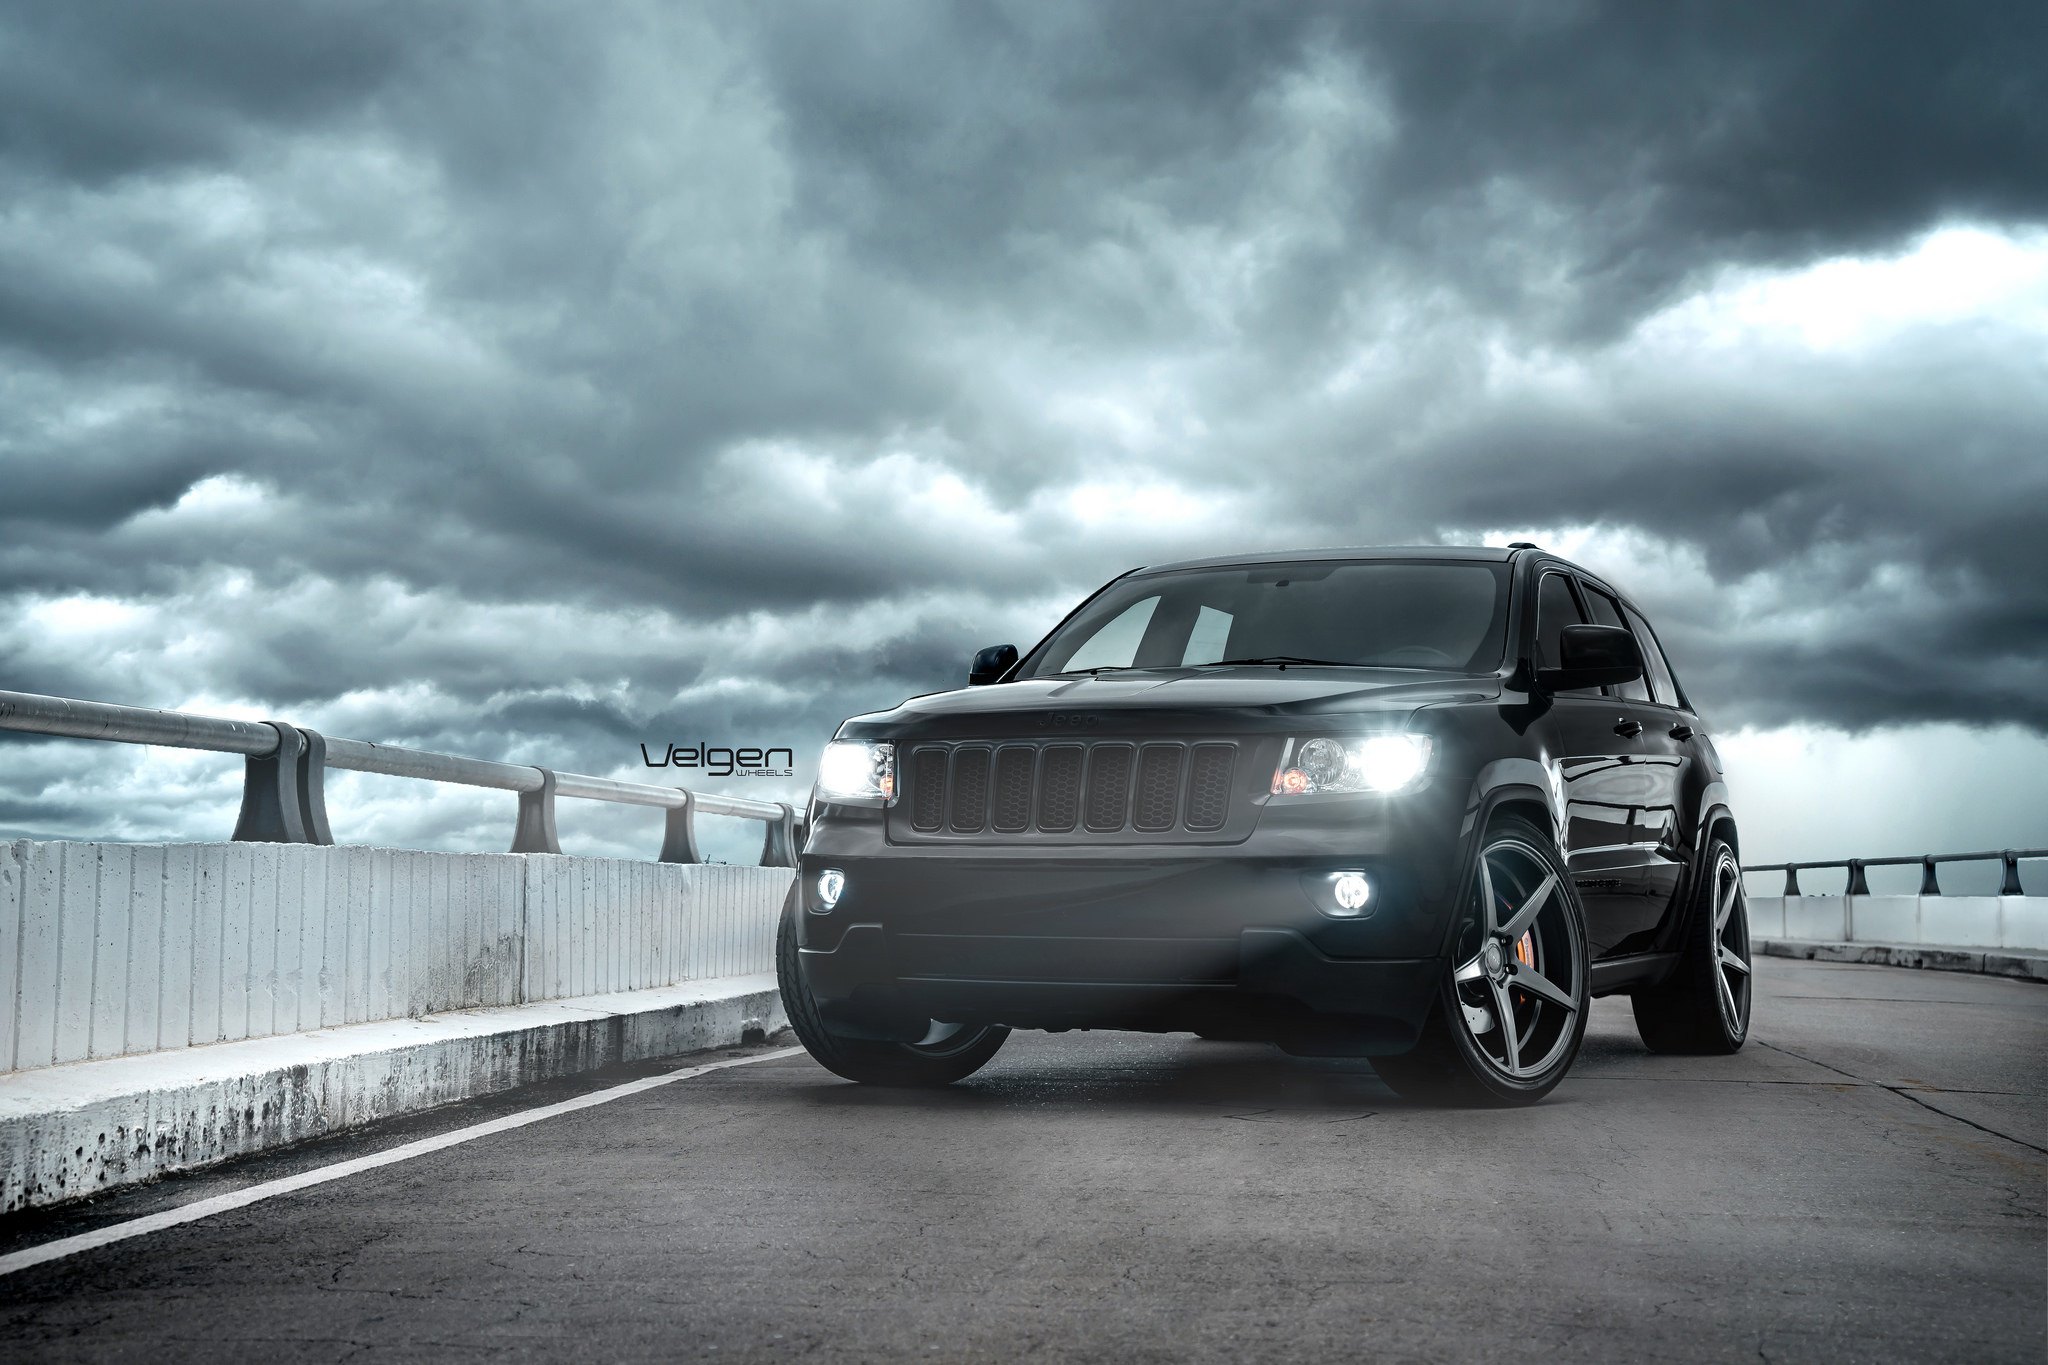 Blacked Out Grille on Custom Jeep Grand Cherokee - Photo by Velgen